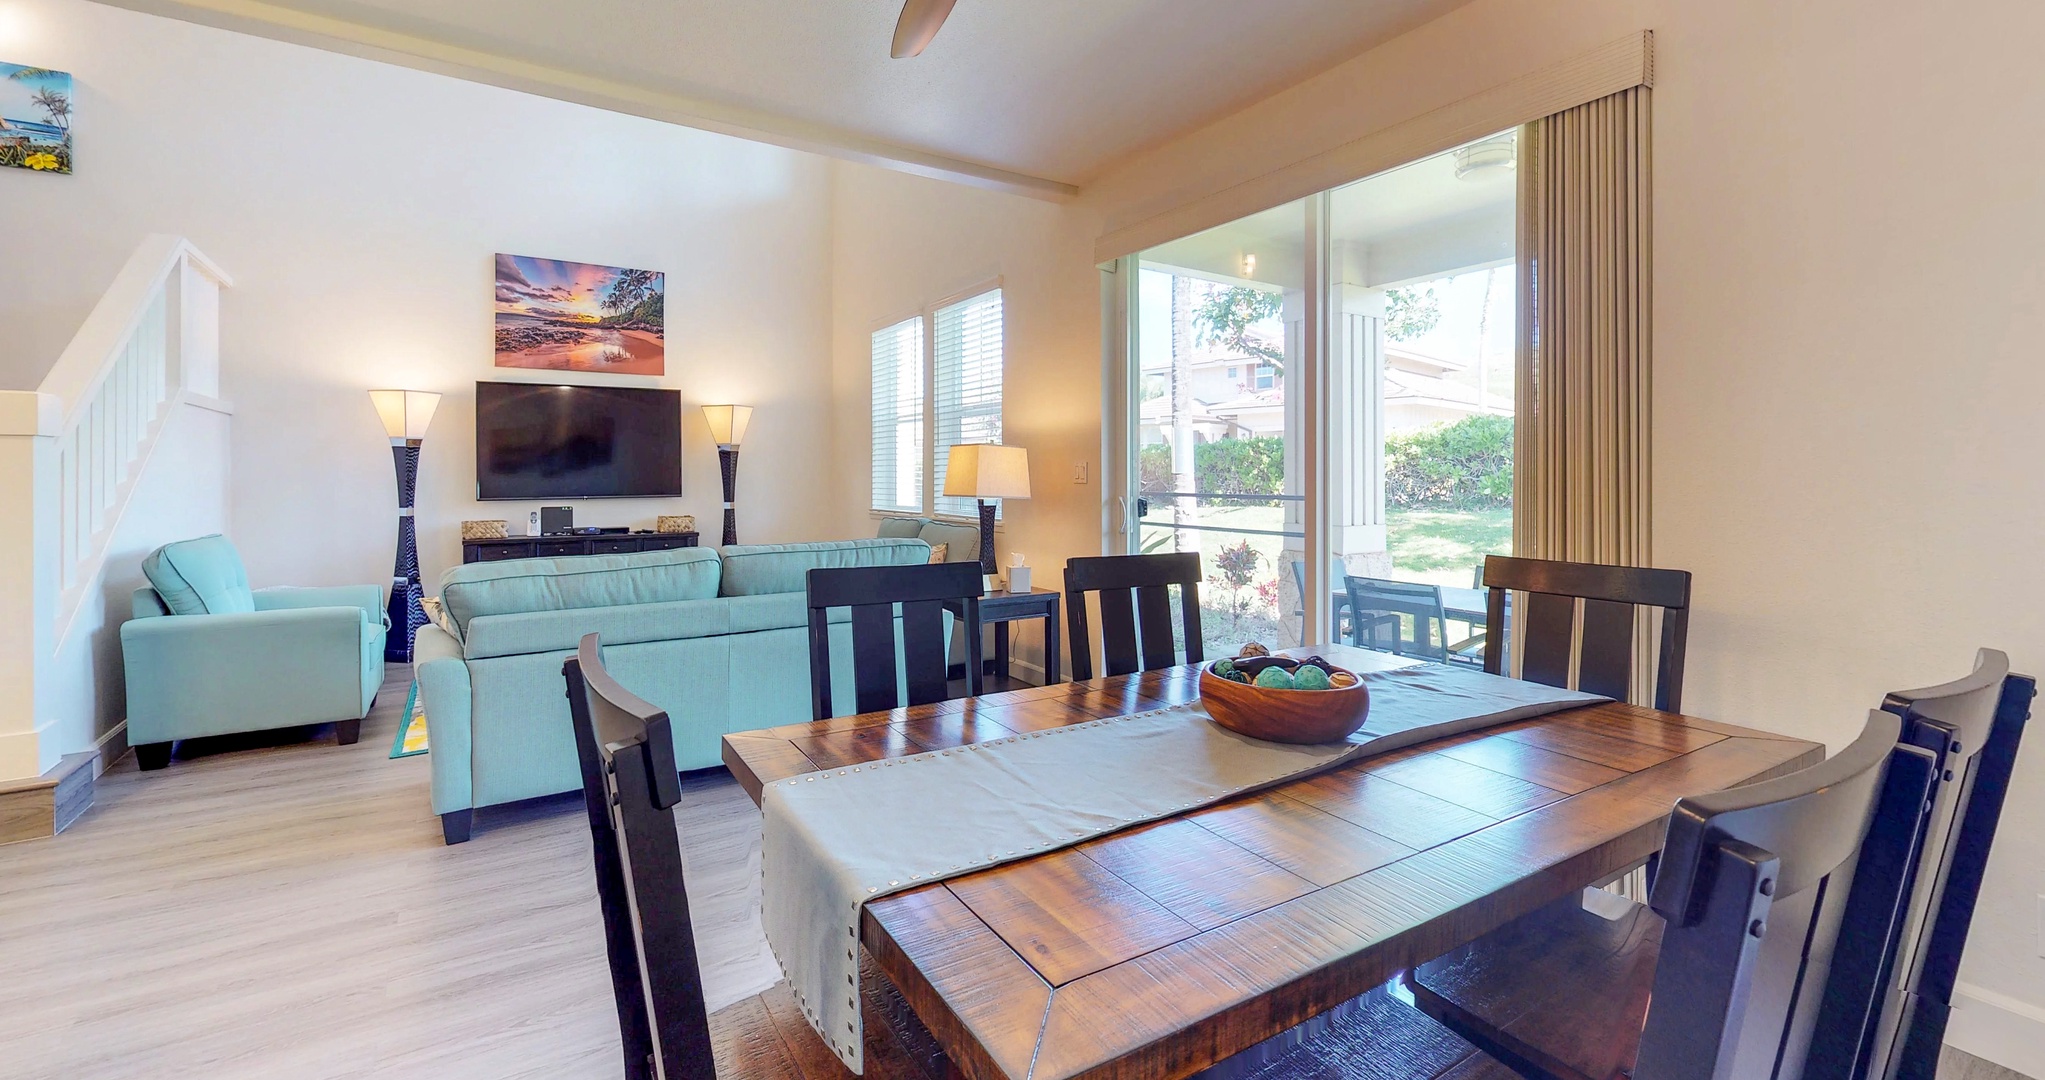 Kapolei Vacation Rentals, Ko Olina Kai 1051D - Enjoy your home away from home with indoor / outdoor spaces.